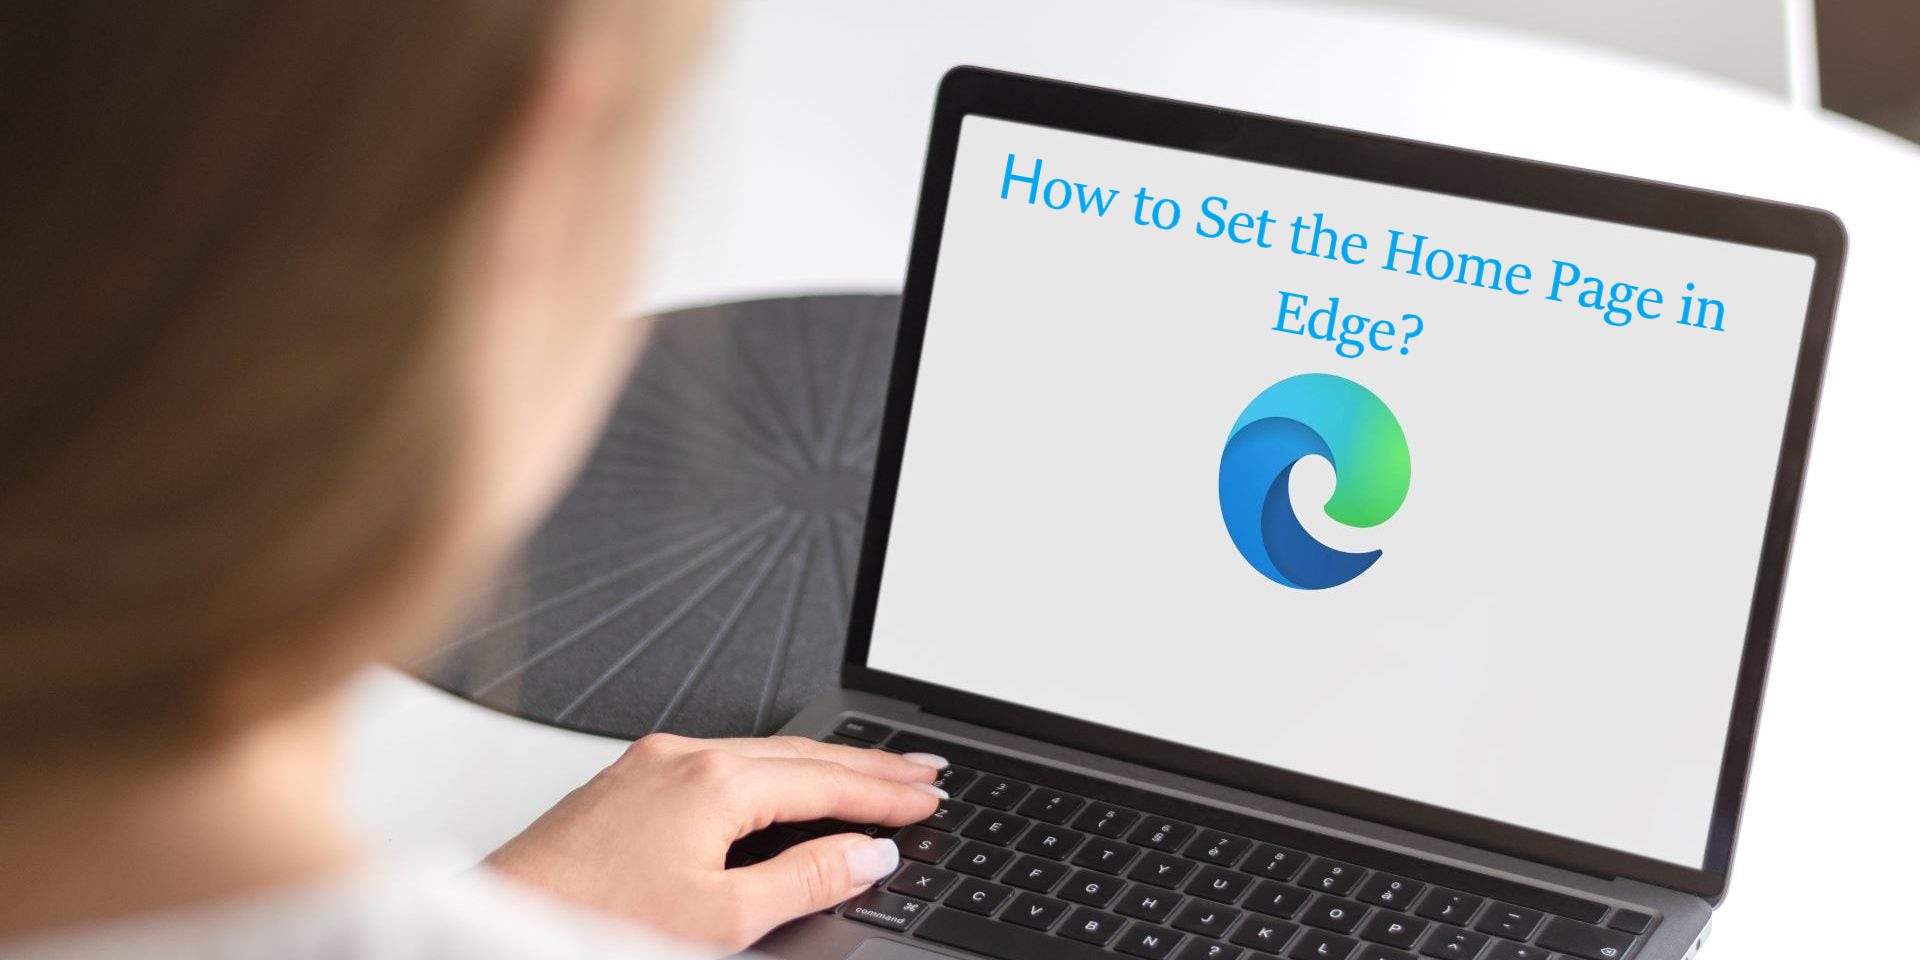 how to set home page in edge?